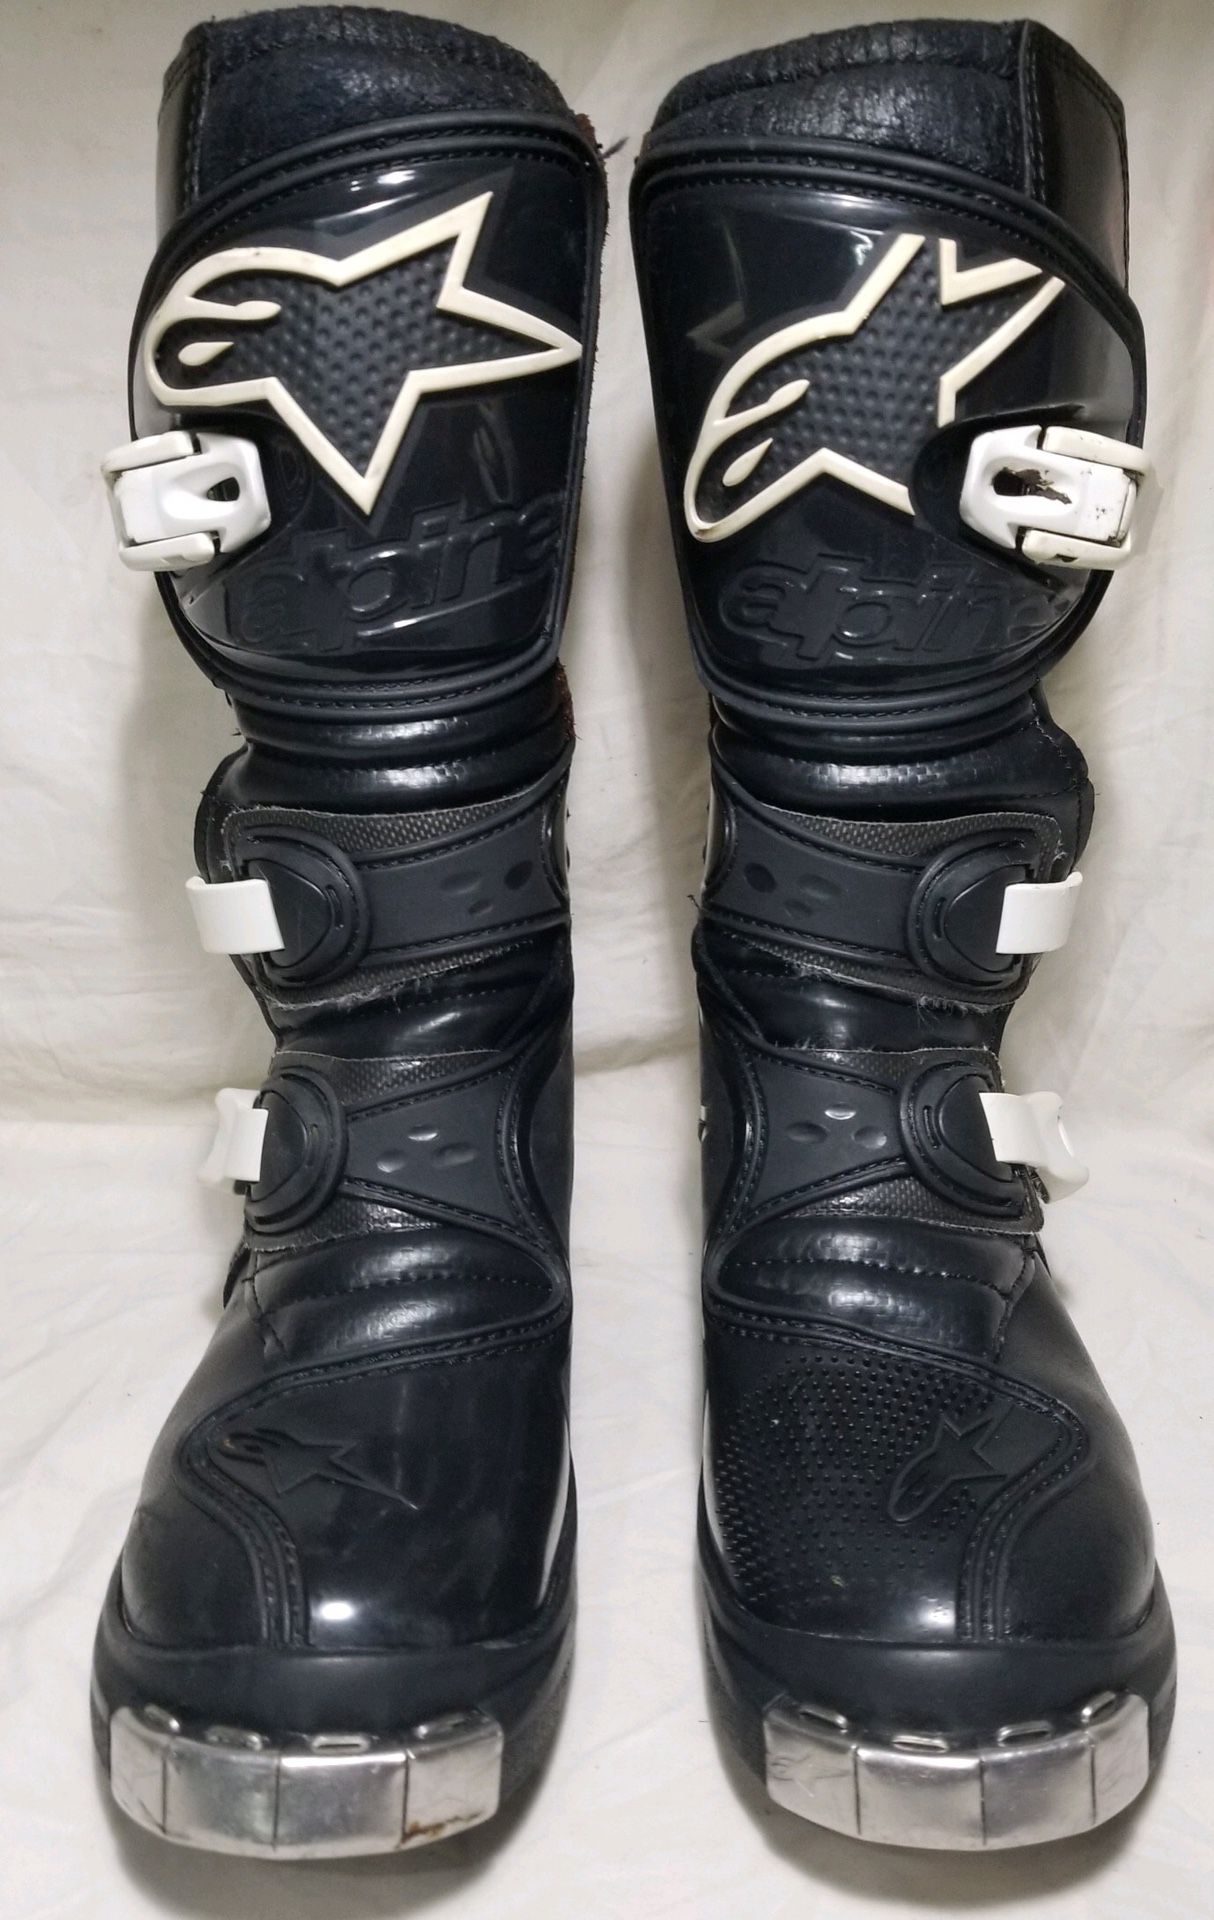 Alpinestars Dirtbike Riding Boots youth Size 2